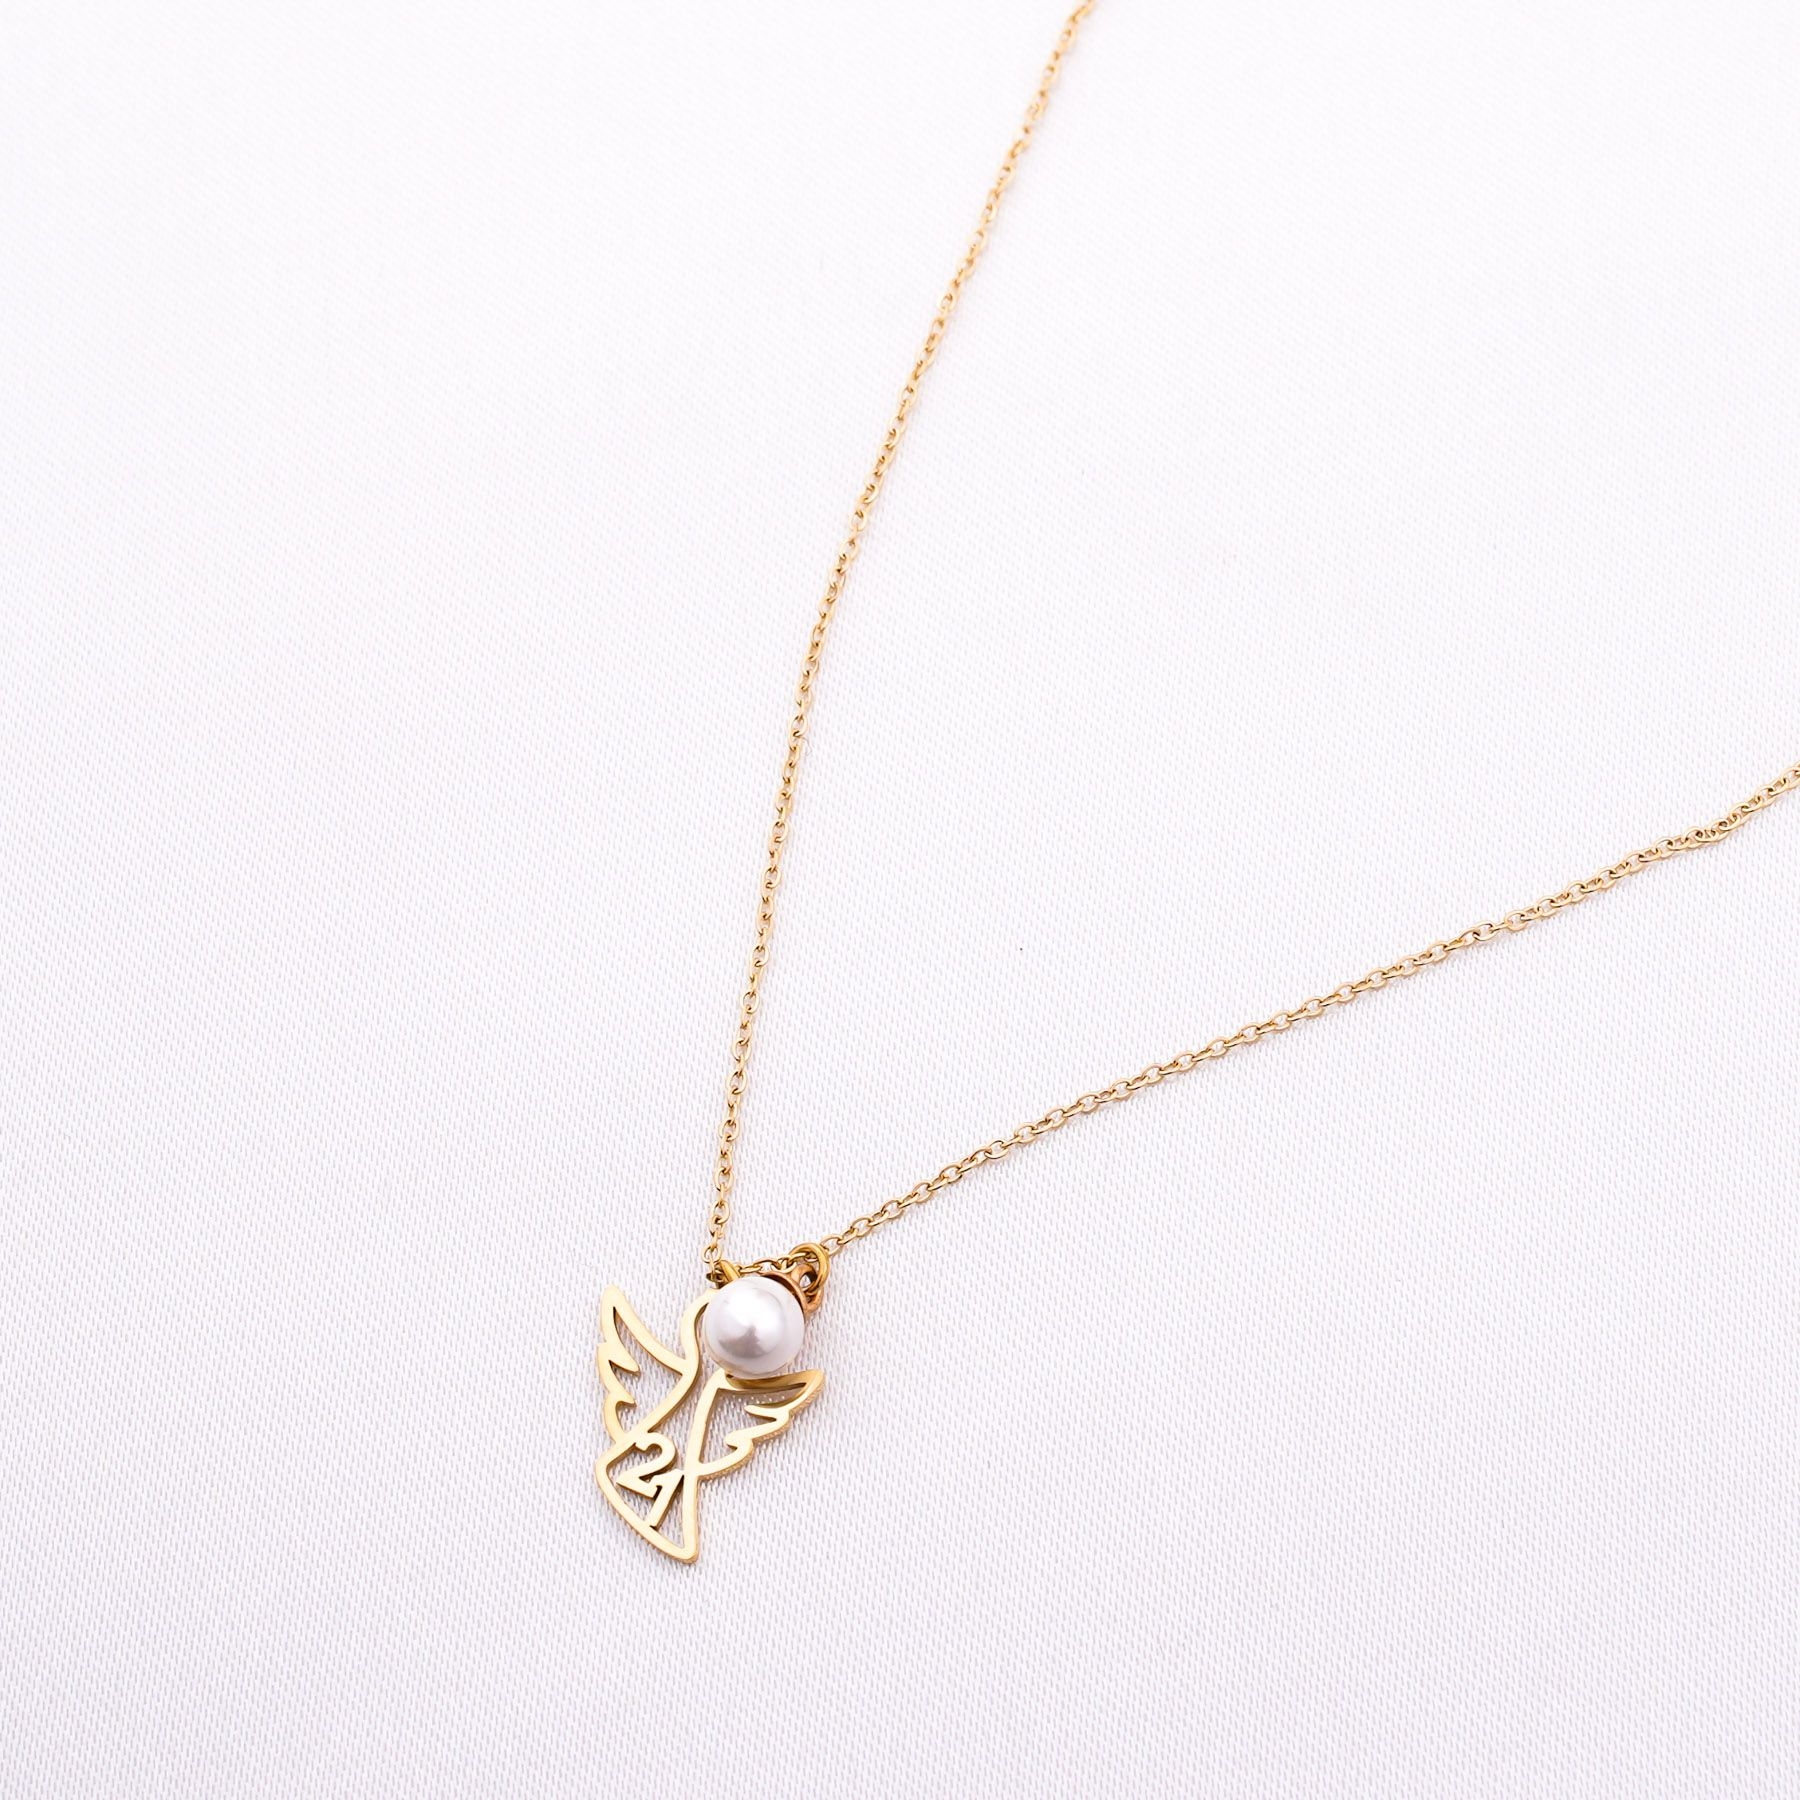 LUCKY DAY NECKLACE - GOLD ' - ' ΜΕΝΤΑΓΙΟΝ